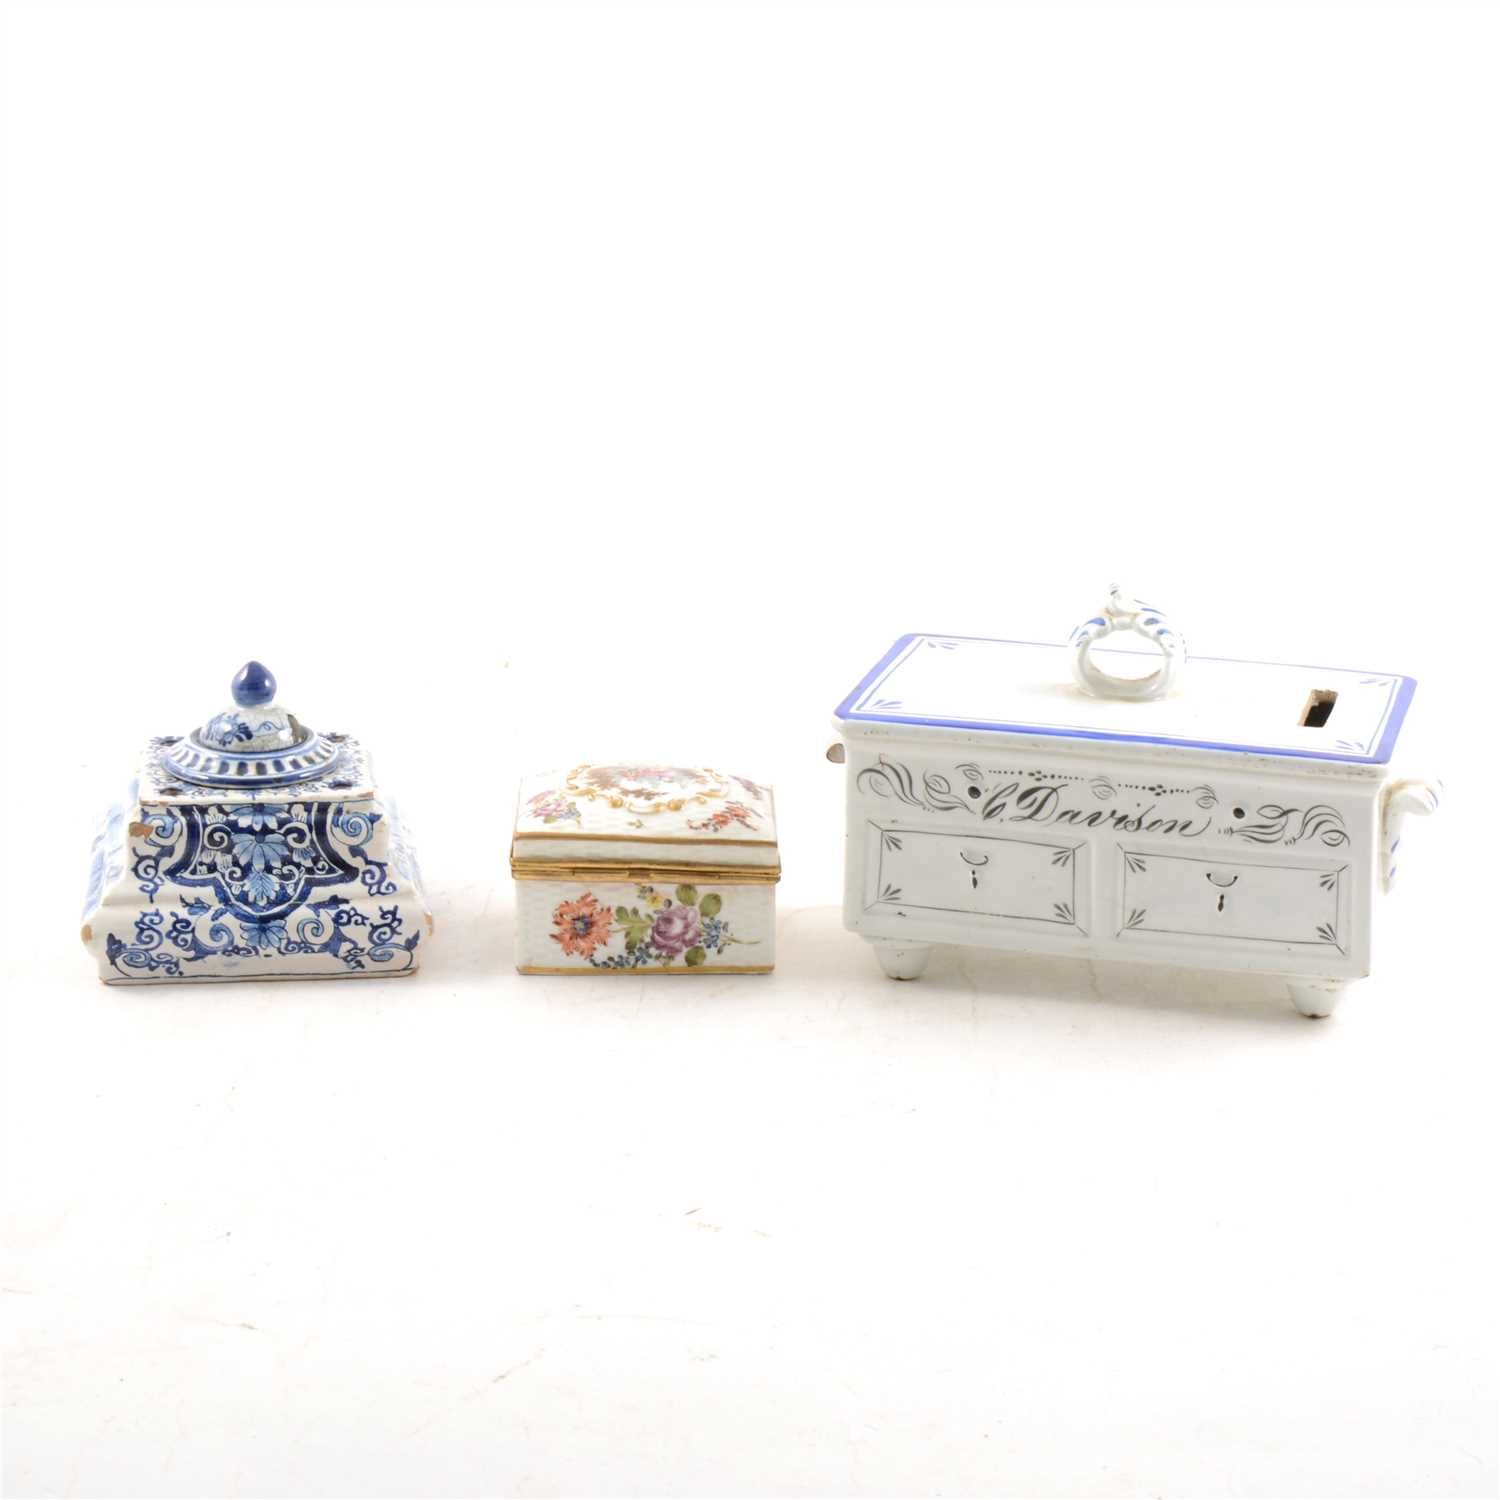 Lot 28 - Dresden porcelain oblong shape snuff box, after Watteau, and two other items.